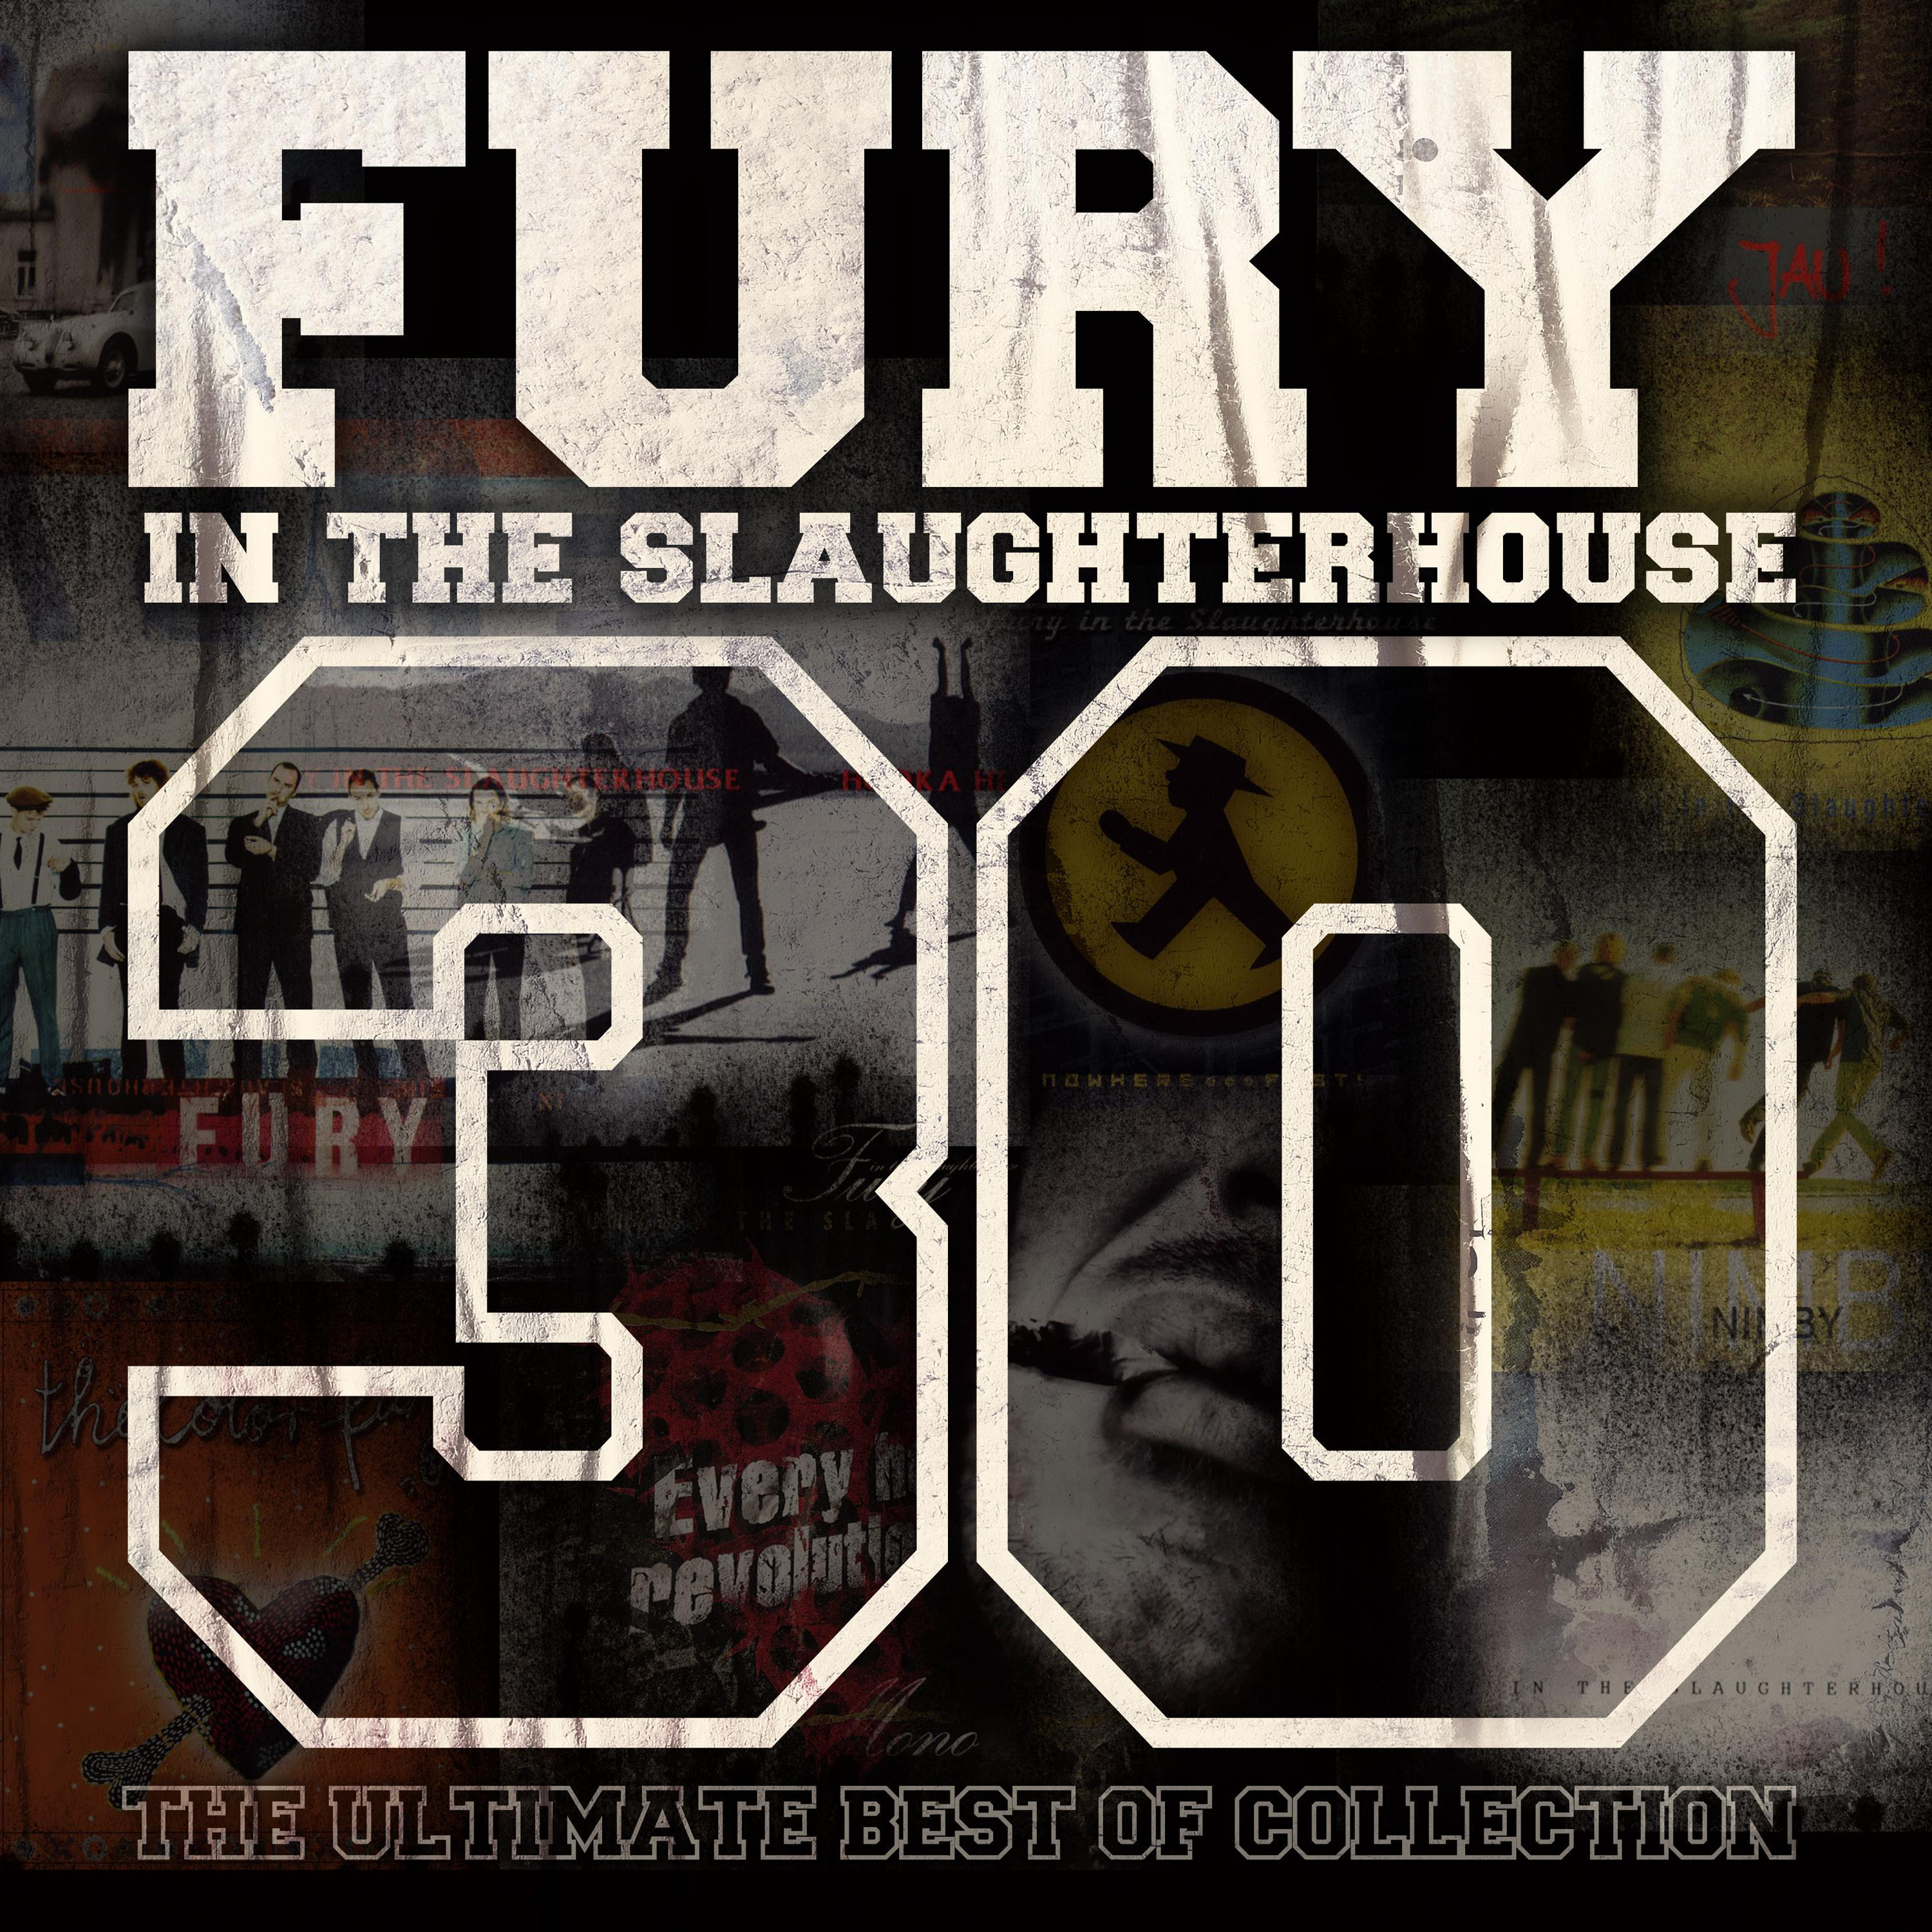 Ultimate - Collection Slaughterhouse Of 30-The Best In (CD) The - Fury